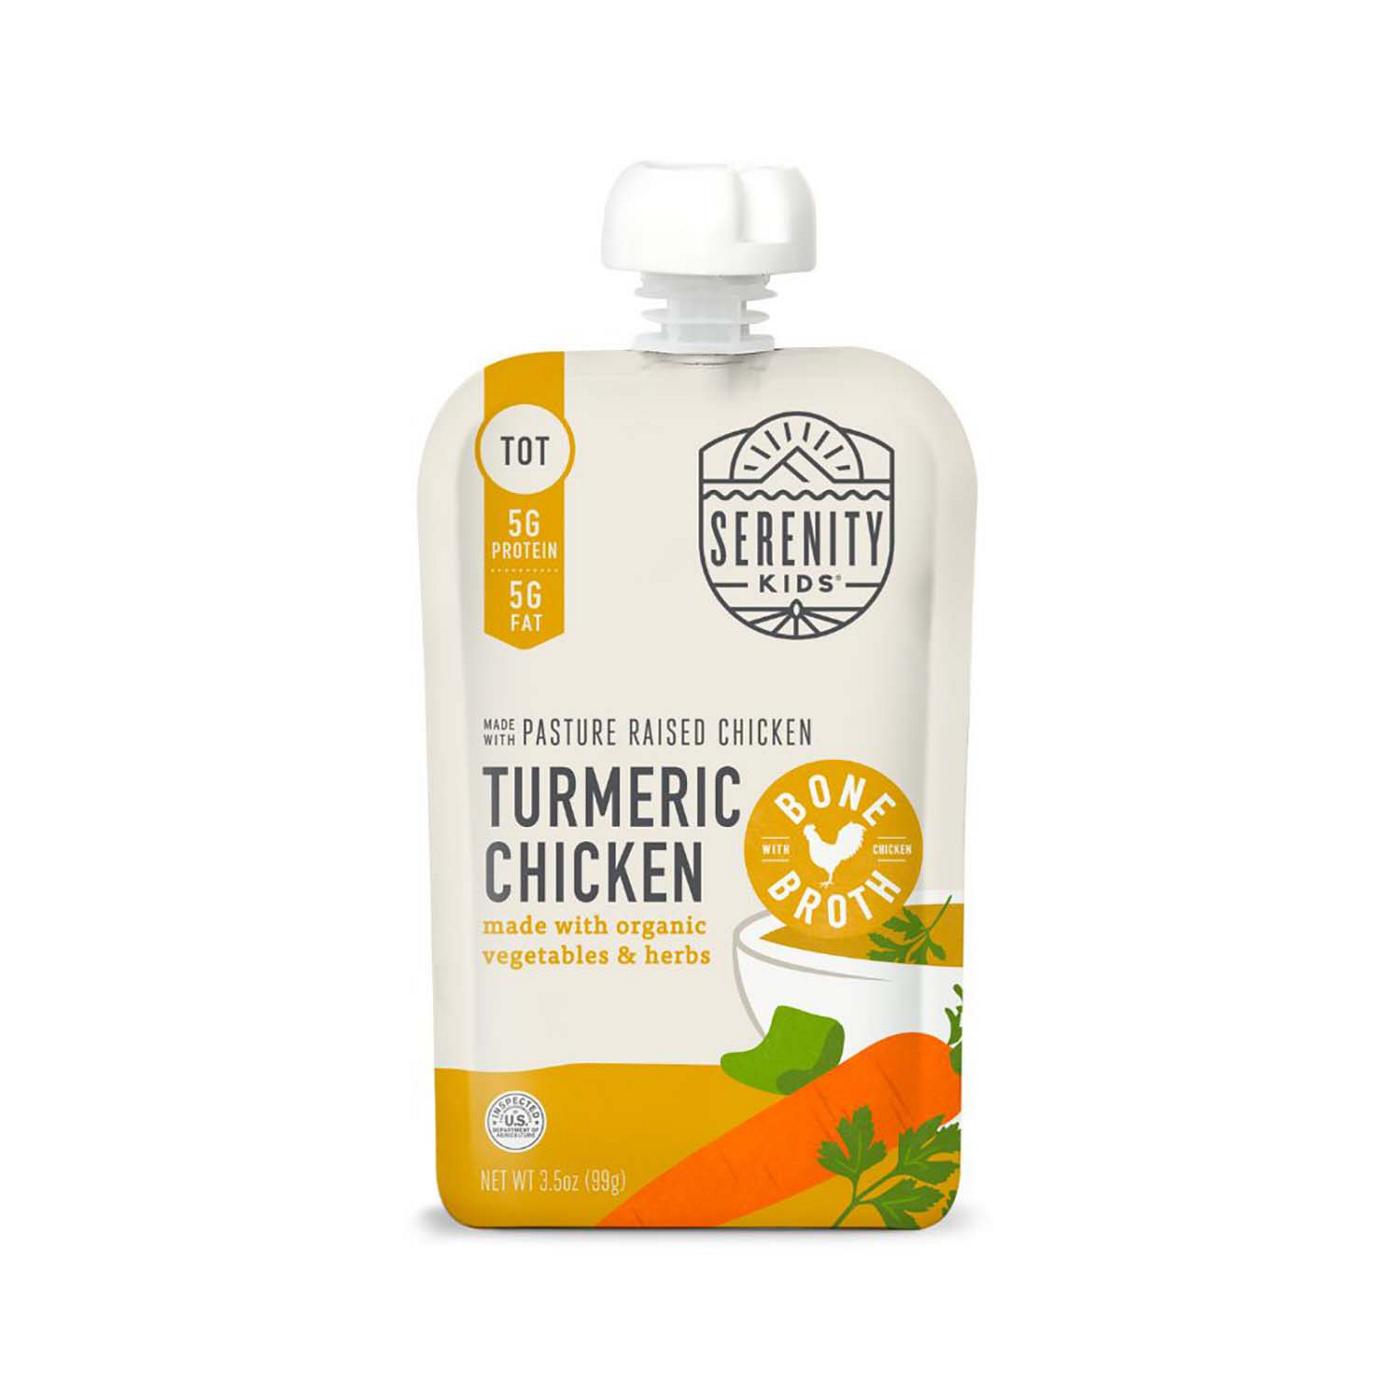 Serenity Kids Turmeric Chicken with Bone Broth Baby Food Pouch; image 1 of 4